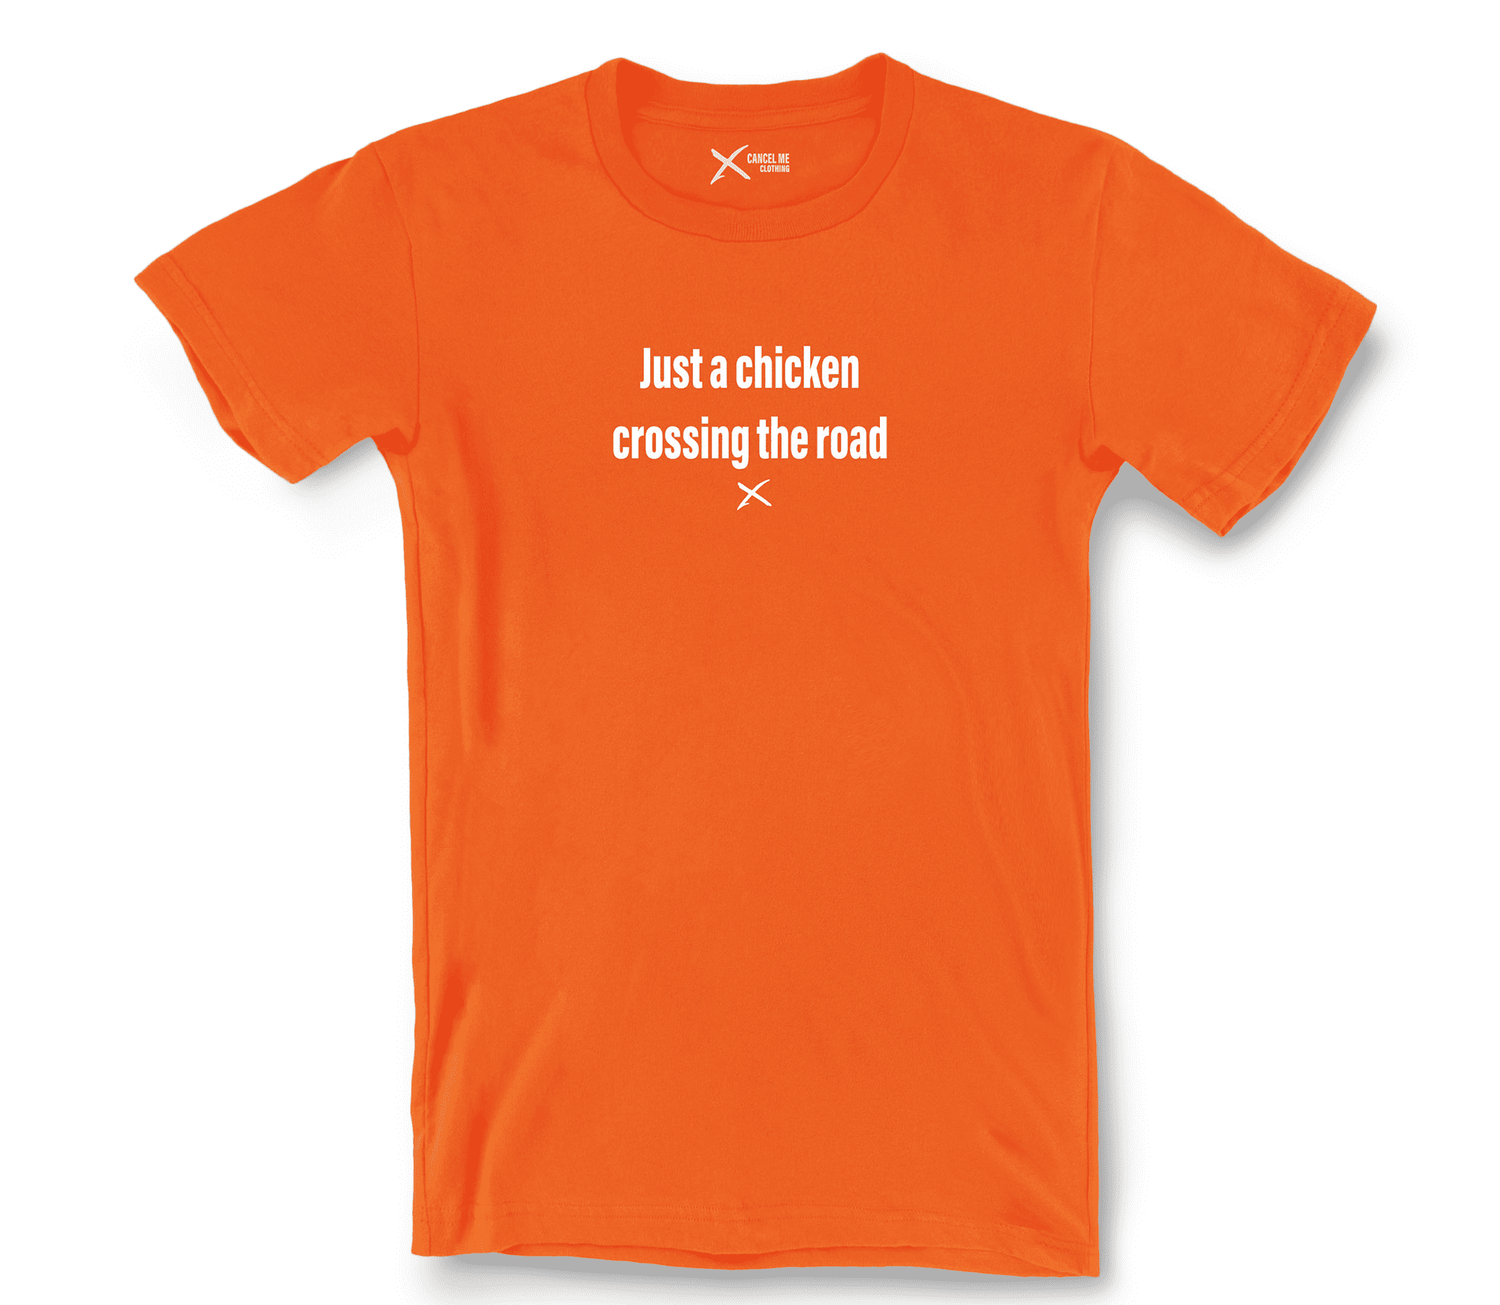 lp-famous_sayings_4-shirt_7791807922346_just-a-chicken-crossing-the-road-shirt_Orange.png